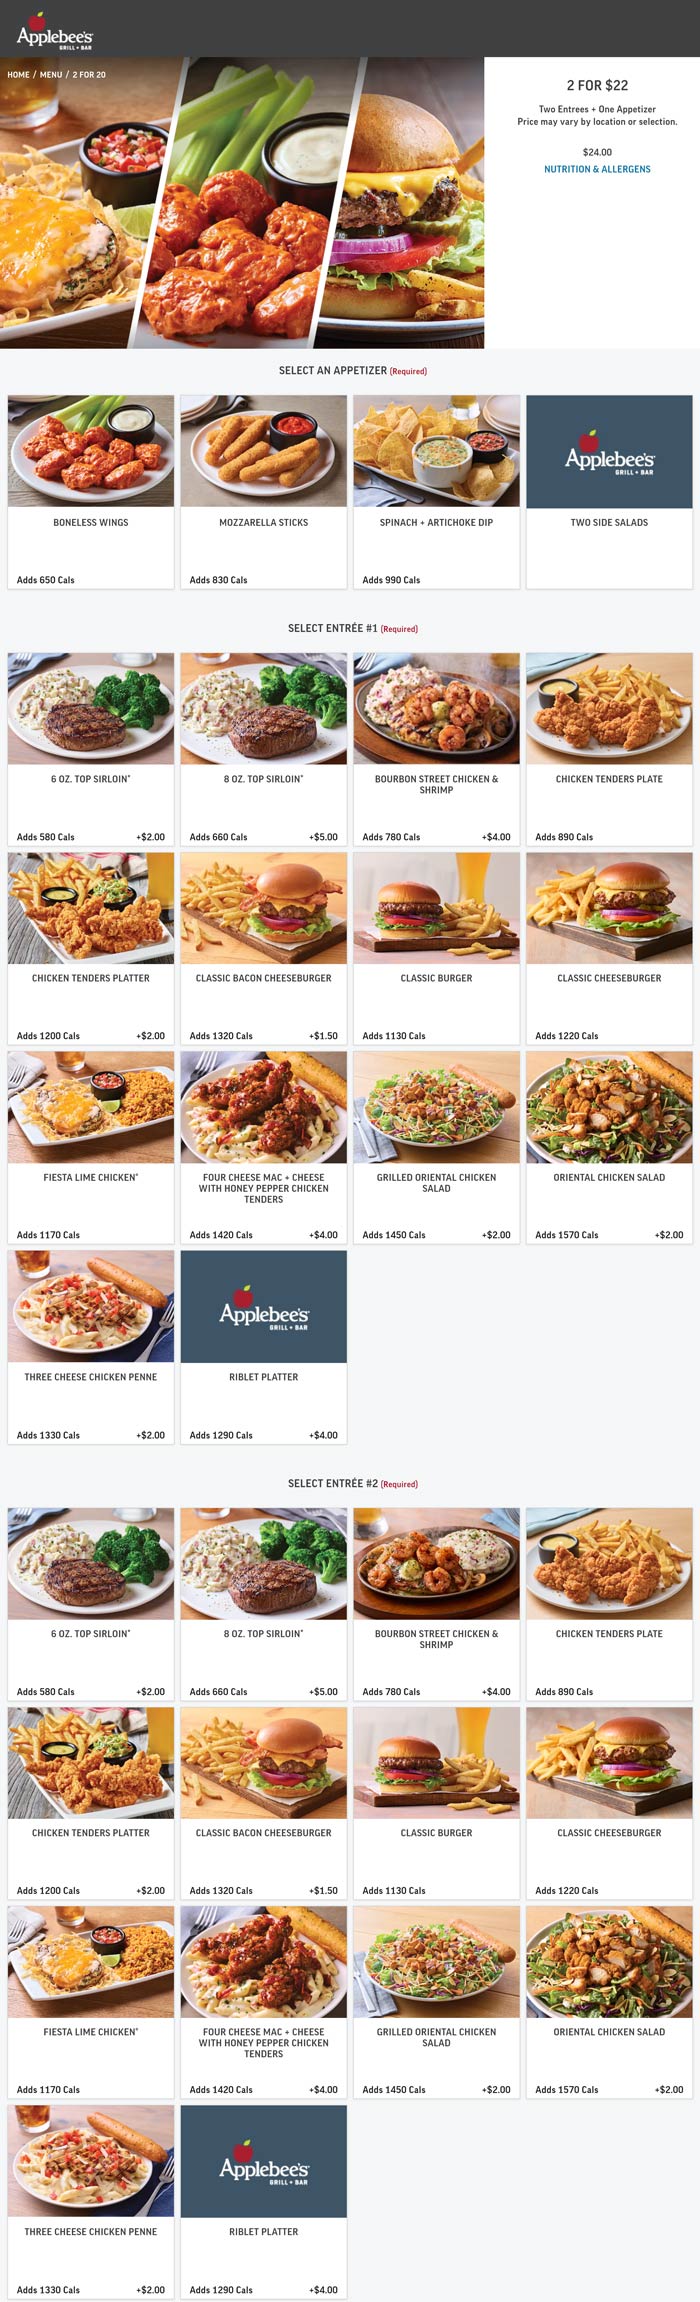 Applebees coupons & promo code for [June 2022]